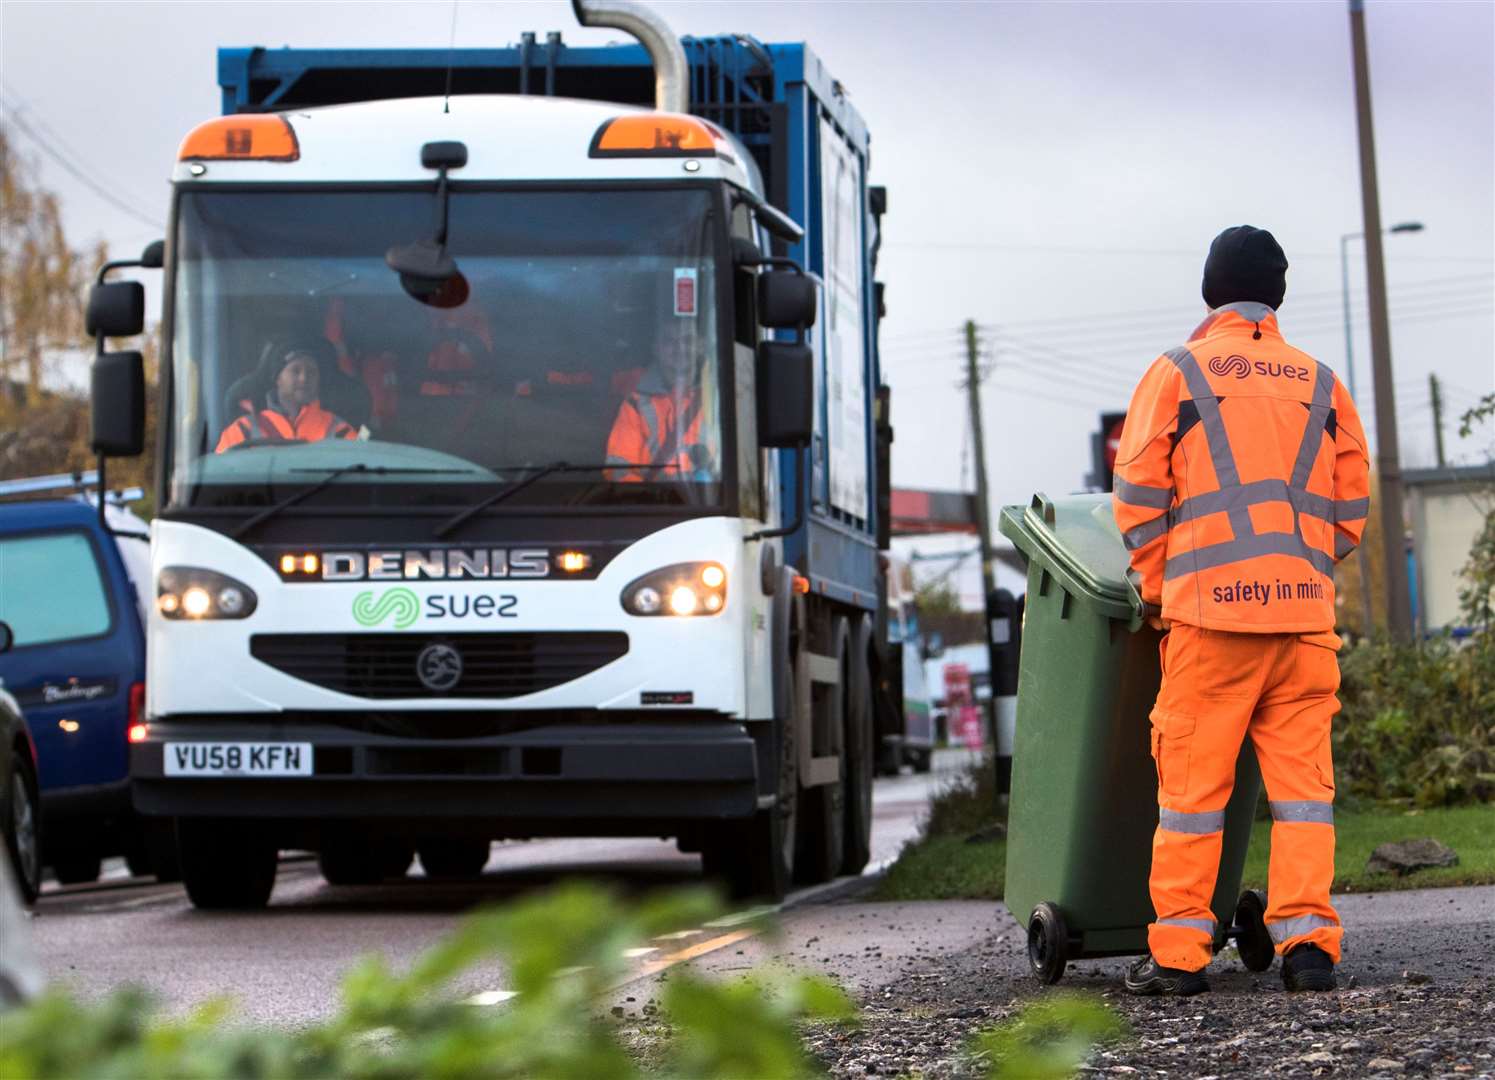 Suez has taken over the bin collections for Ashford, Swale and Maidstone. Photo: Paulbox